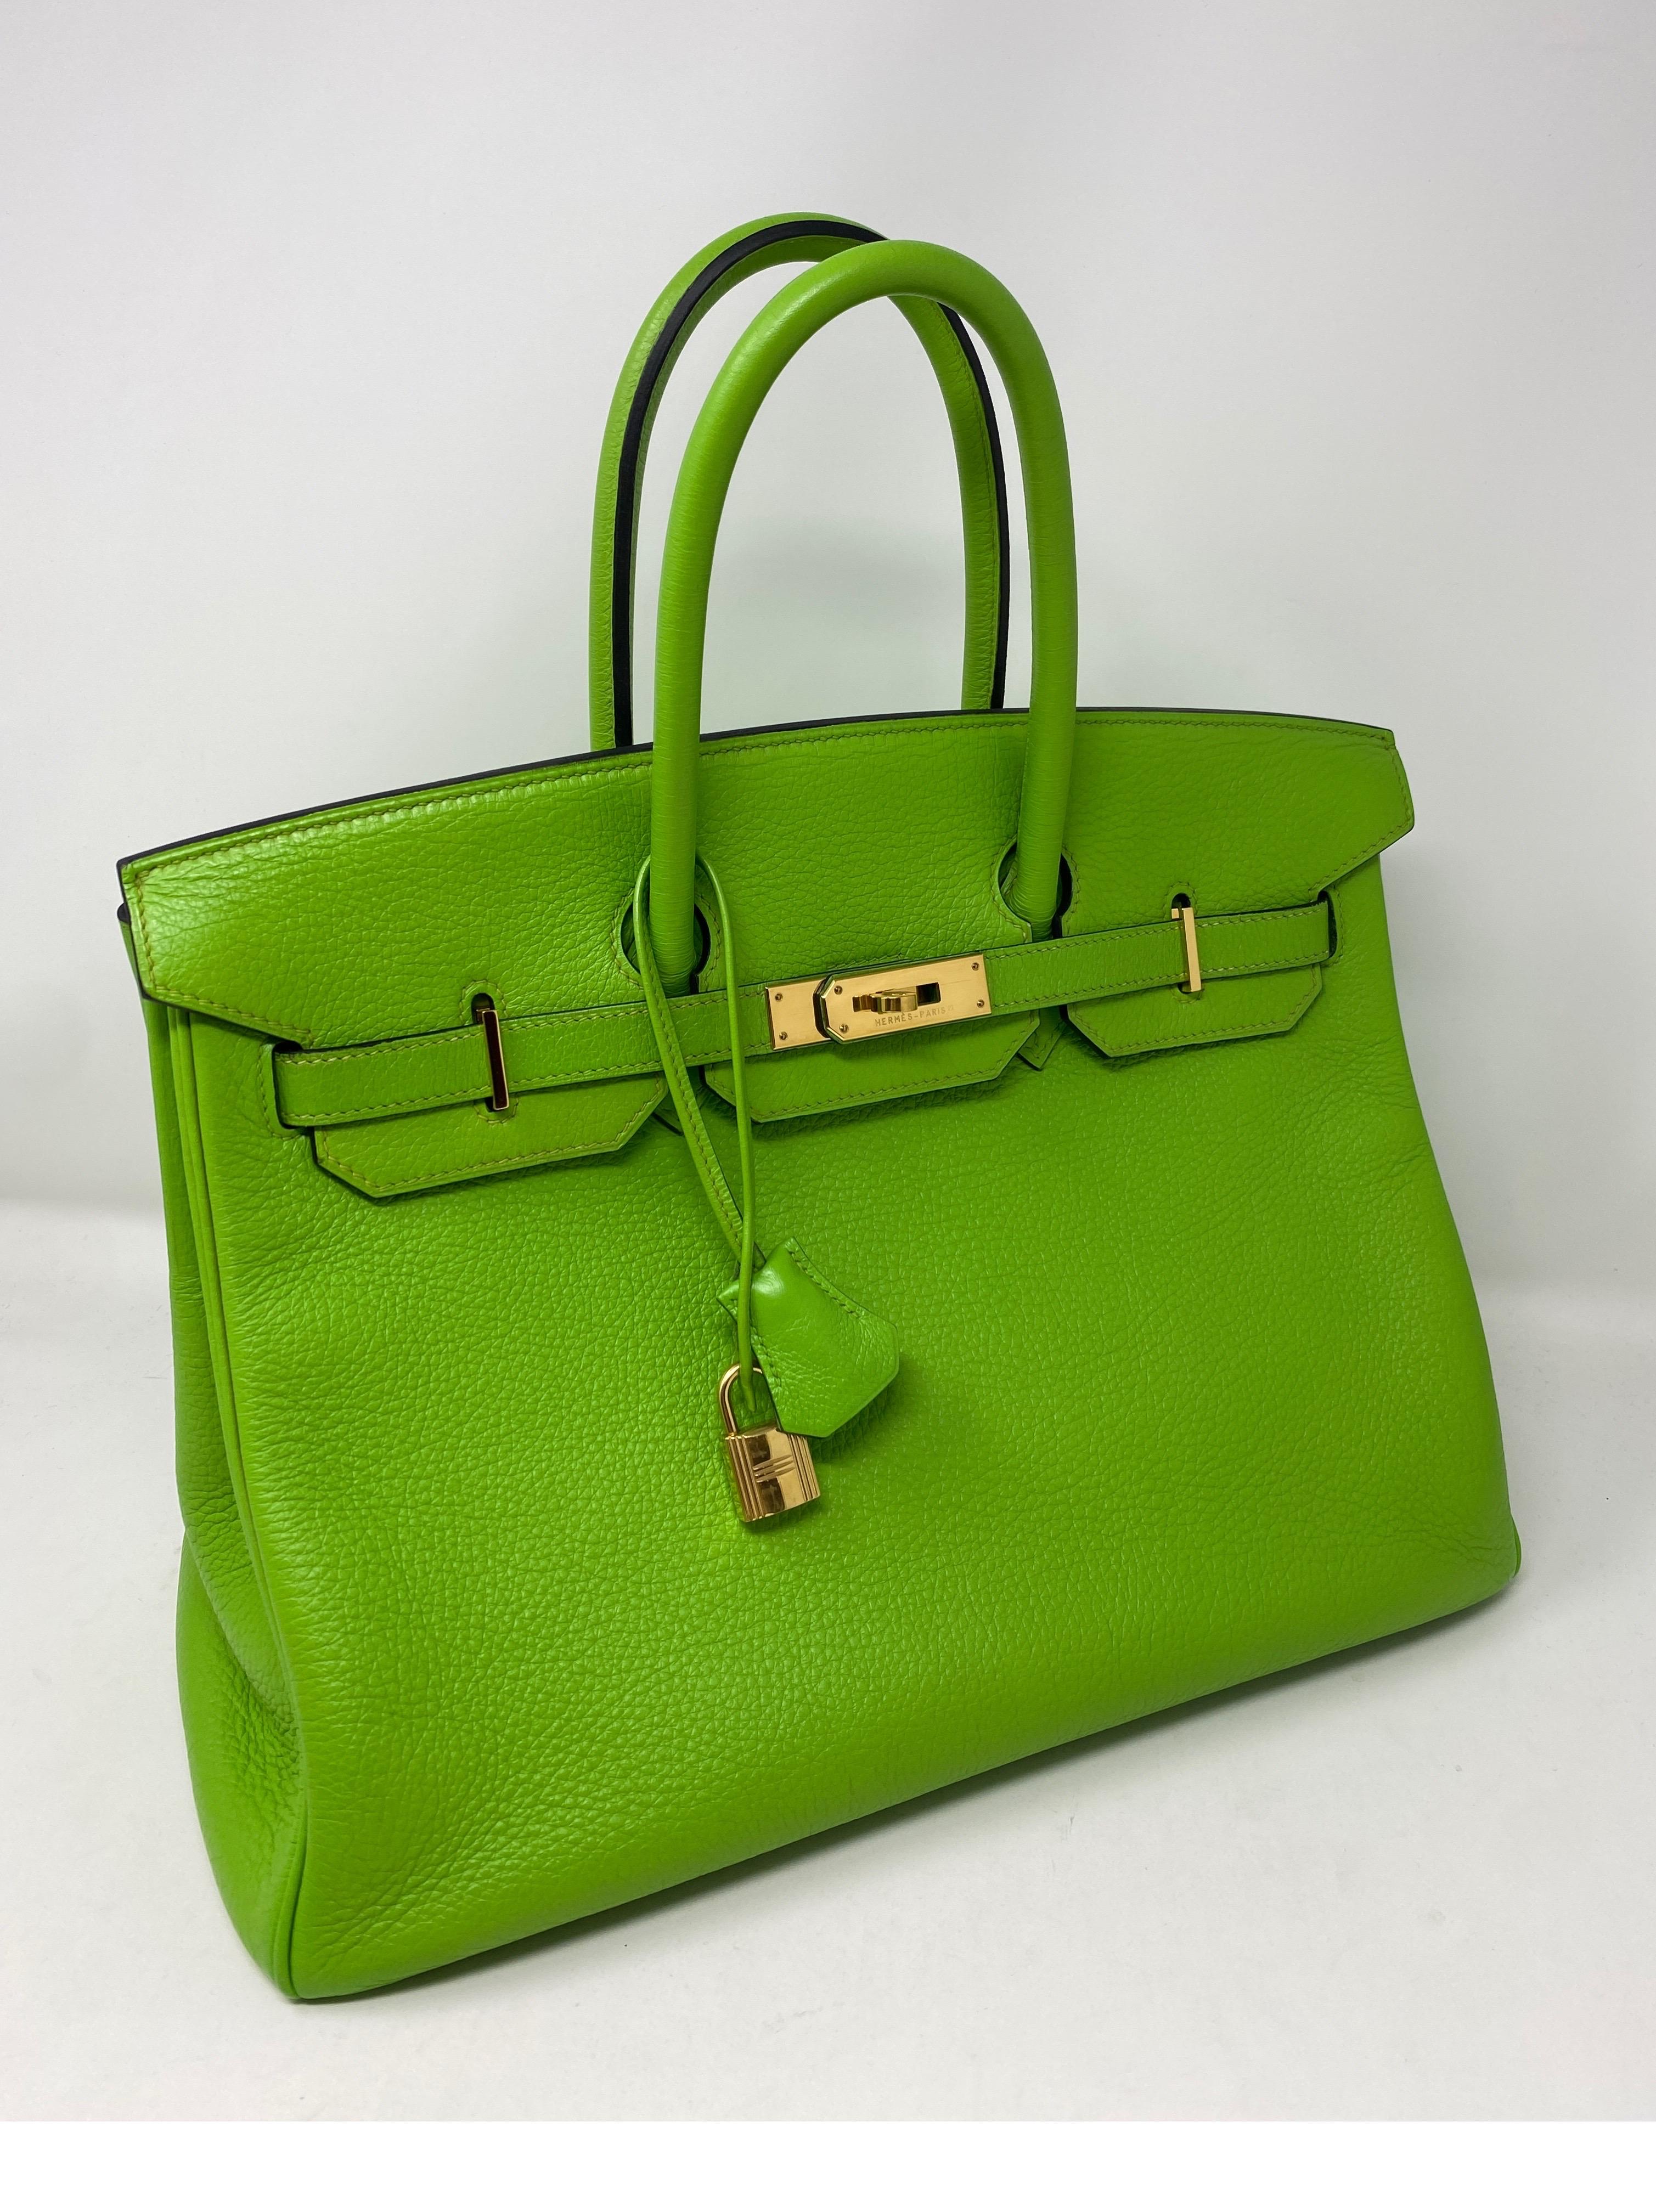 Hermes Birkin 35 Vert Cru Bag. Gold hardware. Beautiful lime green bag in clemence leather. G square stamp. Good condition. Gold and green combo is stunning. Includes clochette, lock, keys, and dust cover. Guaranteed authentic. 